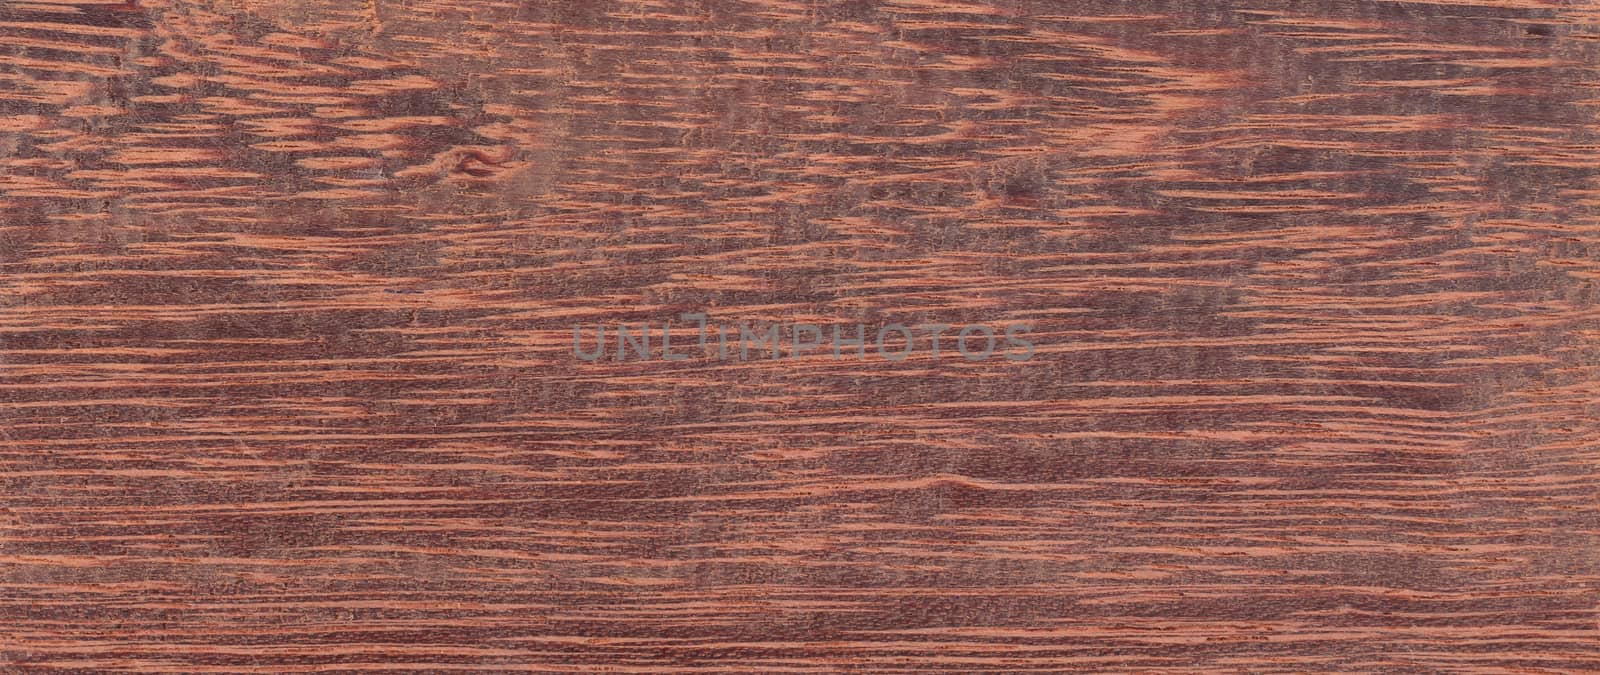 Wood background - Wood from the tropical rainforest - Suriname - Andira Coriacea Pulle